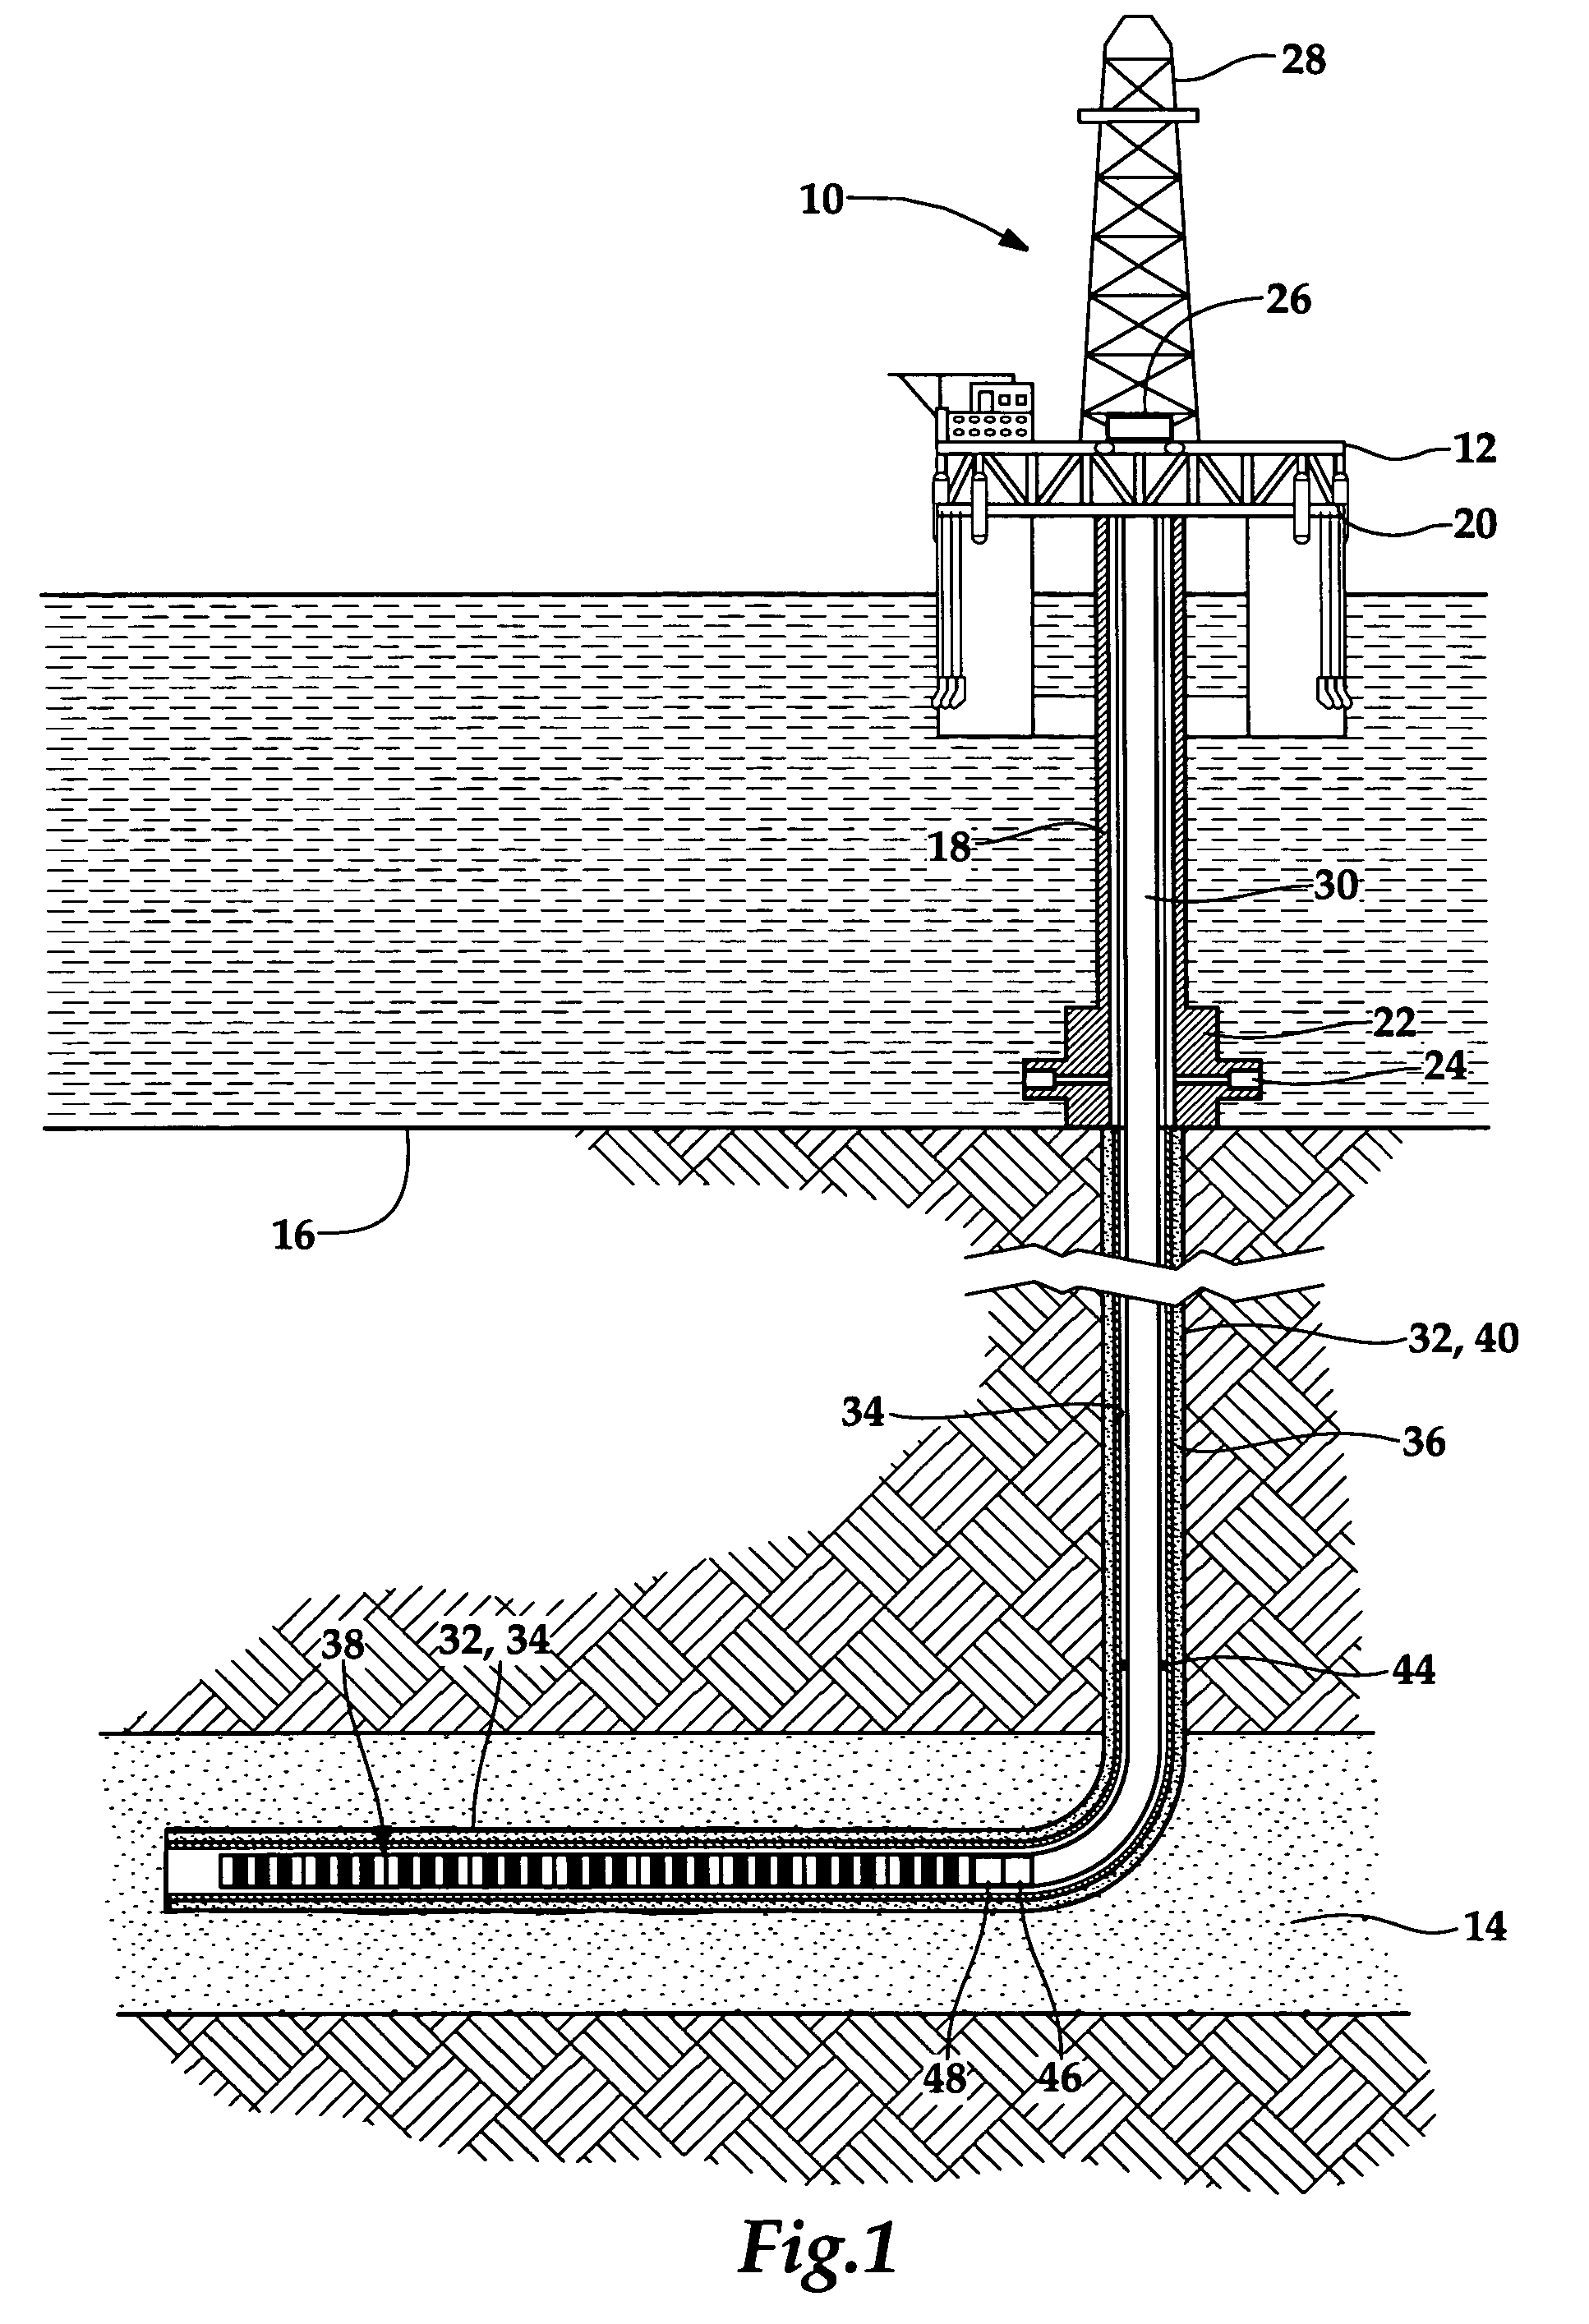 Debris retention perforating apparatus and method for use of same